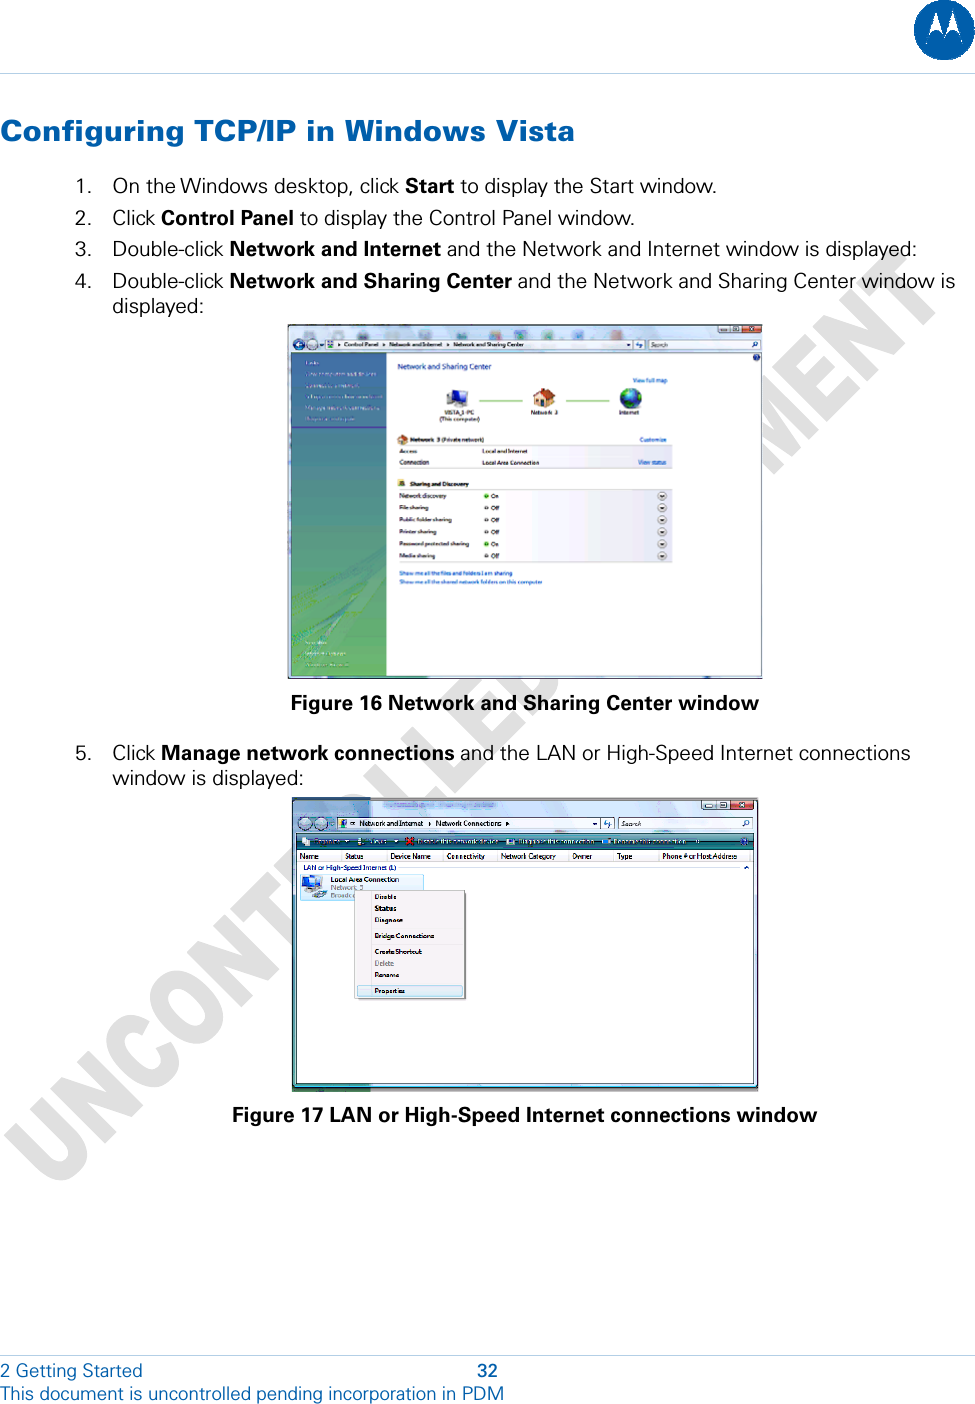  Configuring TCP/IP in Windows Vista 1. On the Windows desktop, click Start to display the Start window. 2. Click Control Panel to display the Control Panel window. 3. Double-click Network and Internet and the Network and Internet window is displayed: 4. Double-click Network and Sharing Center and the Network and Sharing Center window is displayed:  Figure 16 Network and Sharing Center window 5. Click Manage network connections and the LAN or High-Speed Internet connections window is displayed:  Figure 17 LAN or High-Speed Internet connections window 2 Getting Started  32 This document is uncontrolled pending incorporation in PDM  